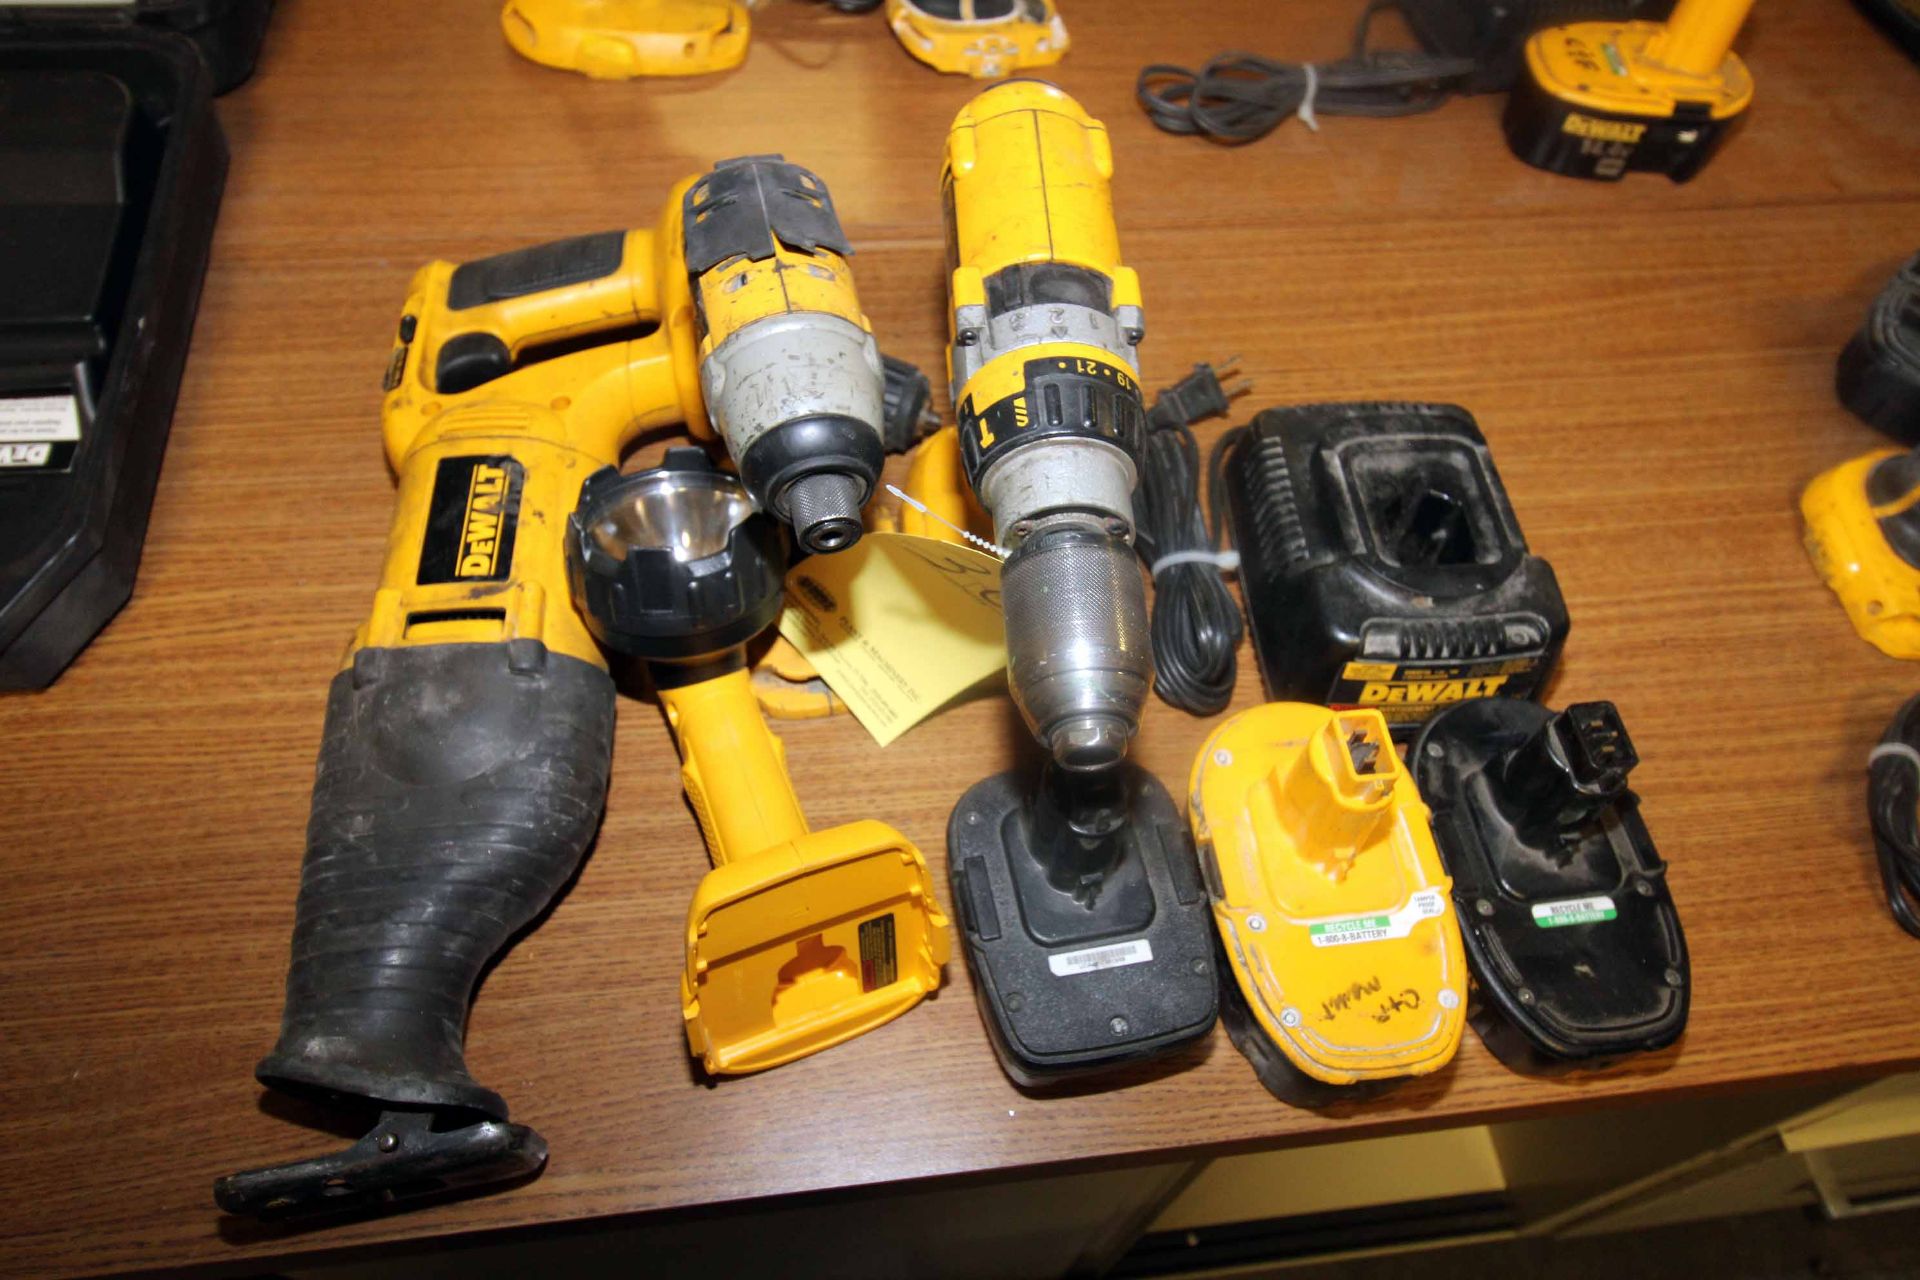 LOT OF DEWALT CORDLESS TOOLING: (1) right angle drill, (1) impact, (1) reciprocating saw, (1) light,